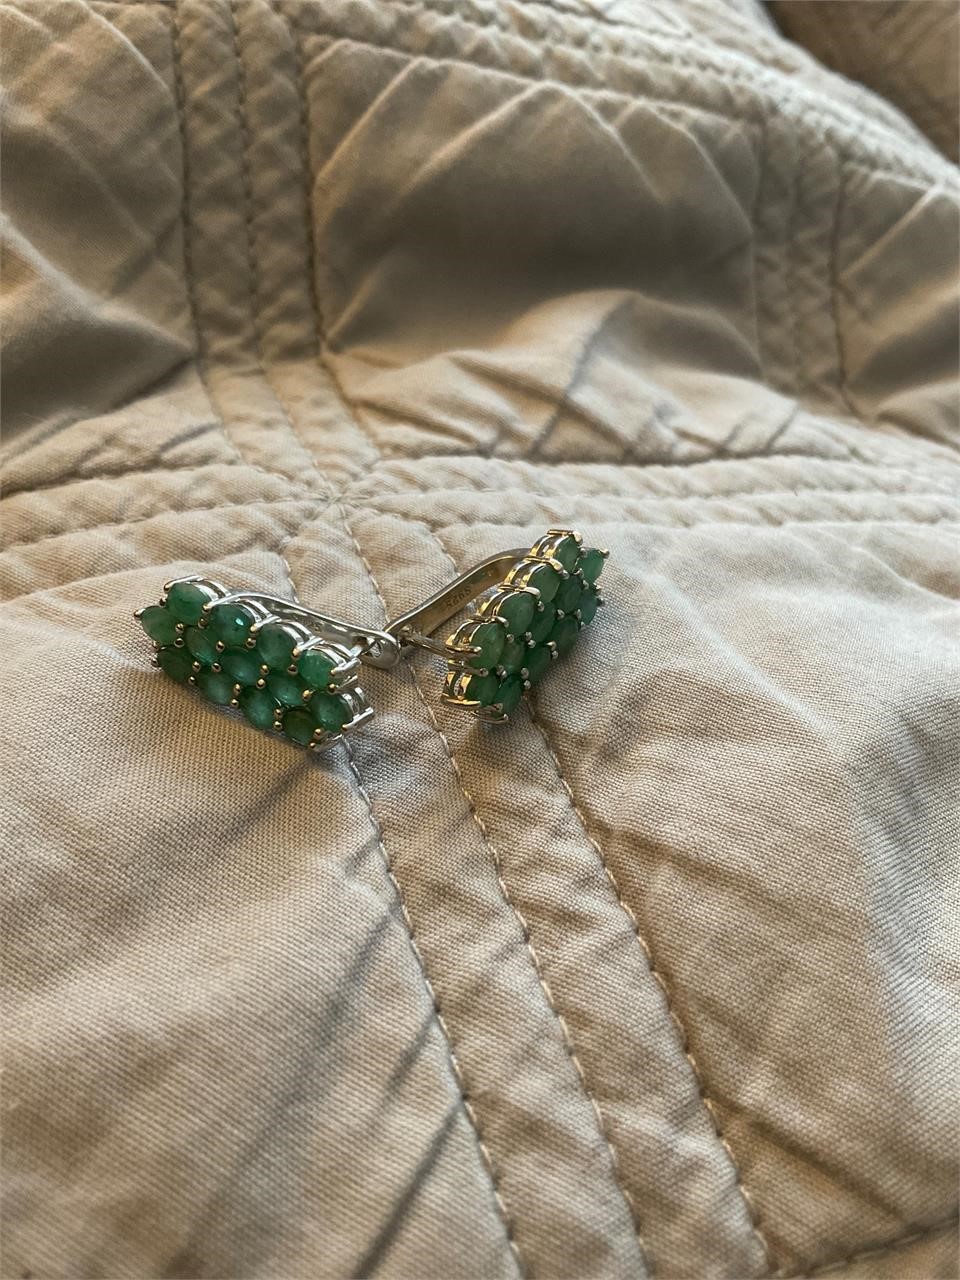 Stunning emerald earring on 925 antique like new